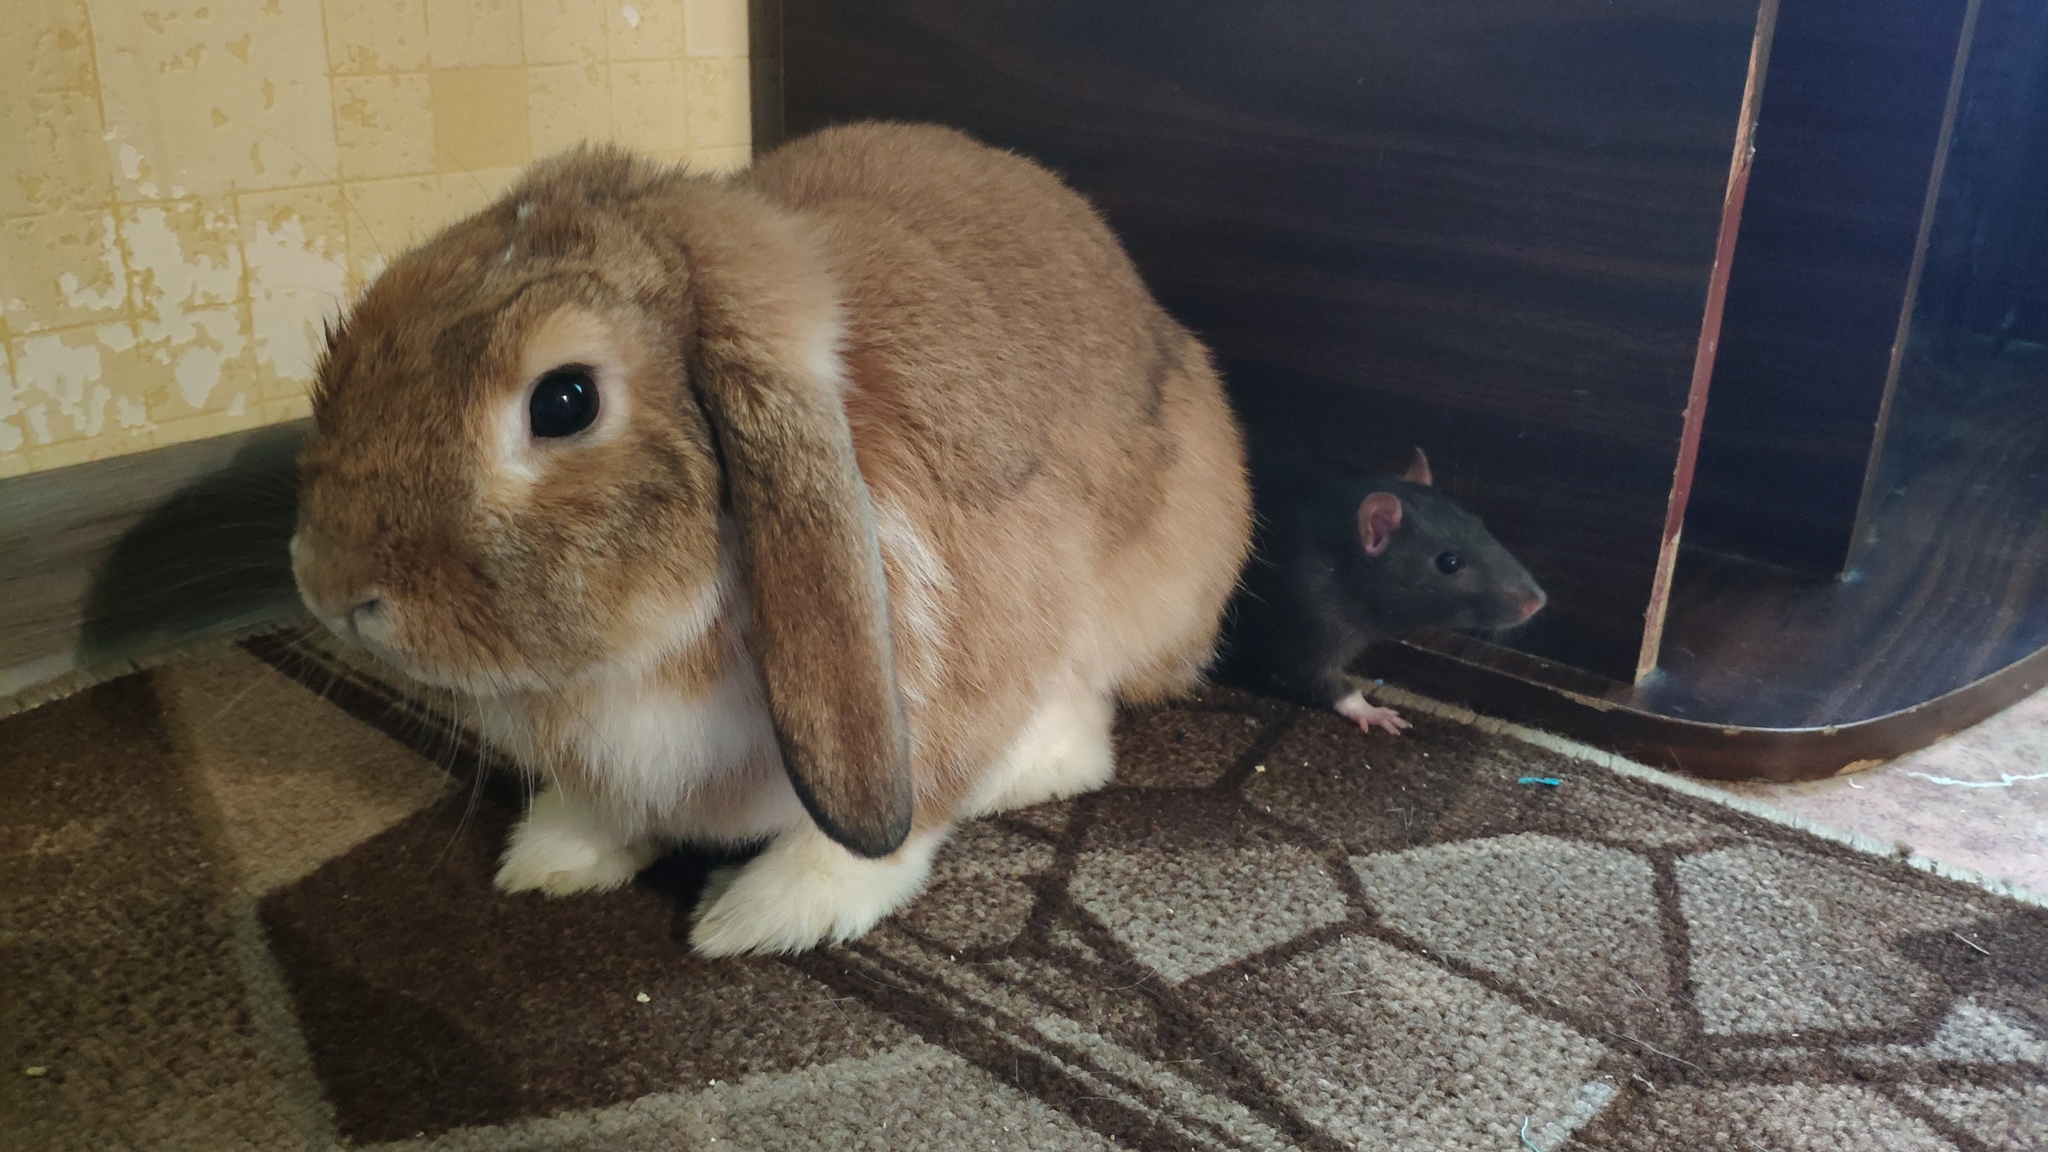 Reply to the post “Don’t get a rabbit” - My, Pets, Zoo, Reply to post